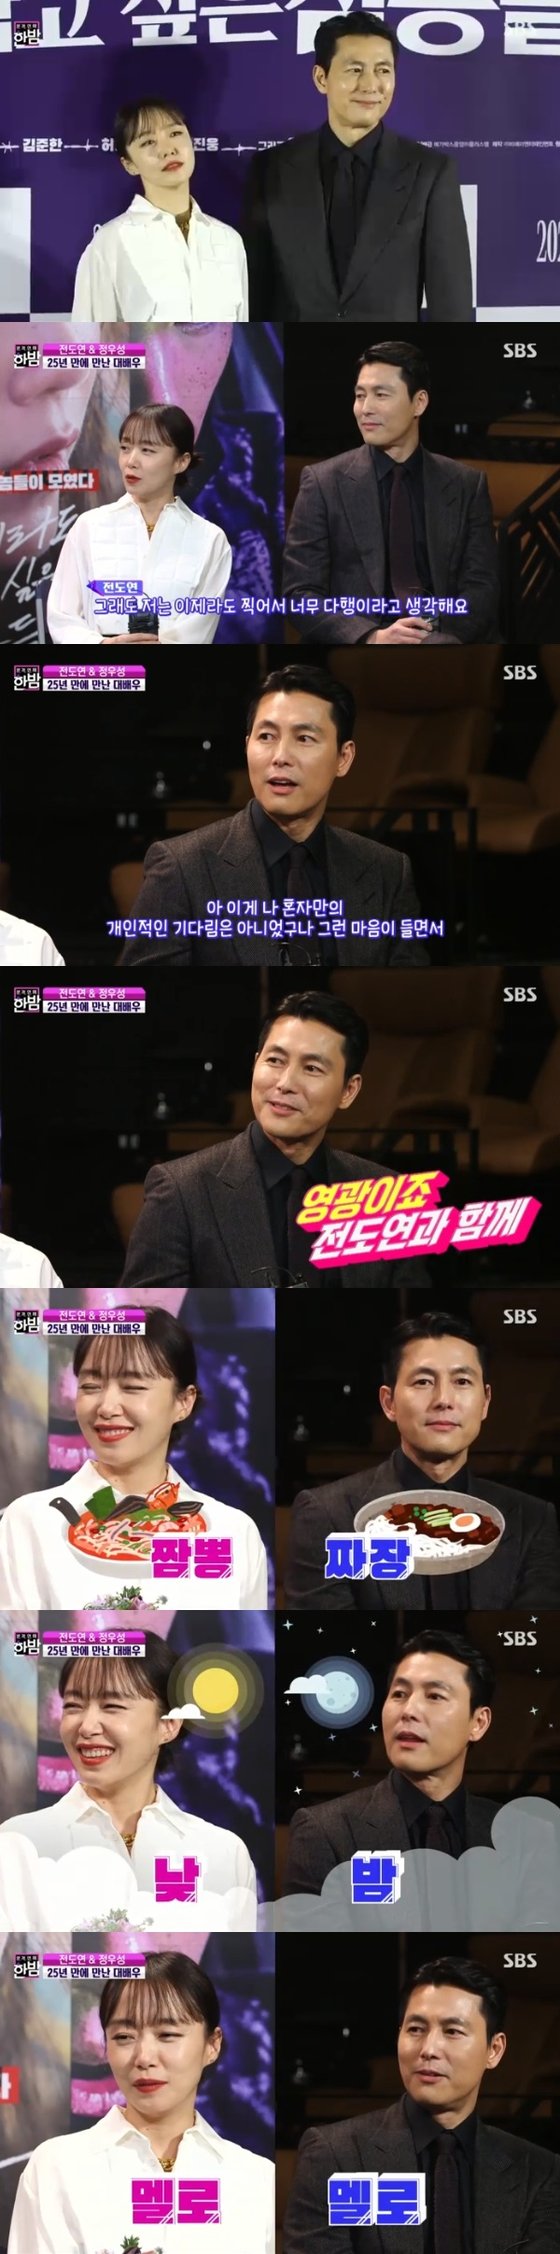 In SBS Full Entertainment Midnight broadcast on the 22nd, the main characters of the movie The Animals (director Kim Yong-hoon) who wants to catch the straw, which is about to be released in February, were interviewed by Jeon Do-yeon Jung Woo-sung Jung Hyun Bin.The brutes who want to catch straw is attracting attention as the first meeting between Jeon Do-yeon and Jung Woo-sung.Jeon Do-yeon said, I am so glad to have taken it now. Jung Woo-sung said, I saw a lot of people telling me, and I thought, This was not my own personal waiting.Its an honor, with Jeon Do-yeon. So, Jeon Do-yeon laughed with his unique charming reaction, saying, Why are you doing this?I thought there were a lot of things I didnt see, I want to see you again at the movie scene, Jeon Do-yeon said of his breathing with Jung Woo-sung.Jung Woo-sung said, I thought that it would be difficult for me to personally look at the filmography and characters of Jeon Do-yeon, but I hope that I will have time to complete Jeon Do-yeon while playing a lighter role.Jeon Do-yeon responded, Thank you, its really touching, and Jung Woo-sung said, What did I say, now?Jeon Do-yeon and Jung Woo-sung played a game of Lee Shin-jung to confirm Chemie, not Chemie, but Jeon Do-yeon and Jung Woo-sung chose the opposite words as champon, jajang, day and night to make the scene into a laughing sea.However, Thriller vs Melody both cited Melo and raised expectations for later melodrama.Meanwhile, The Beasts Who Want to Hold the Spray is a crime scene of ordinary humans planning the worst of their lives to take the last chance of their lives, the money bag.Photo: SBS broadcast capture